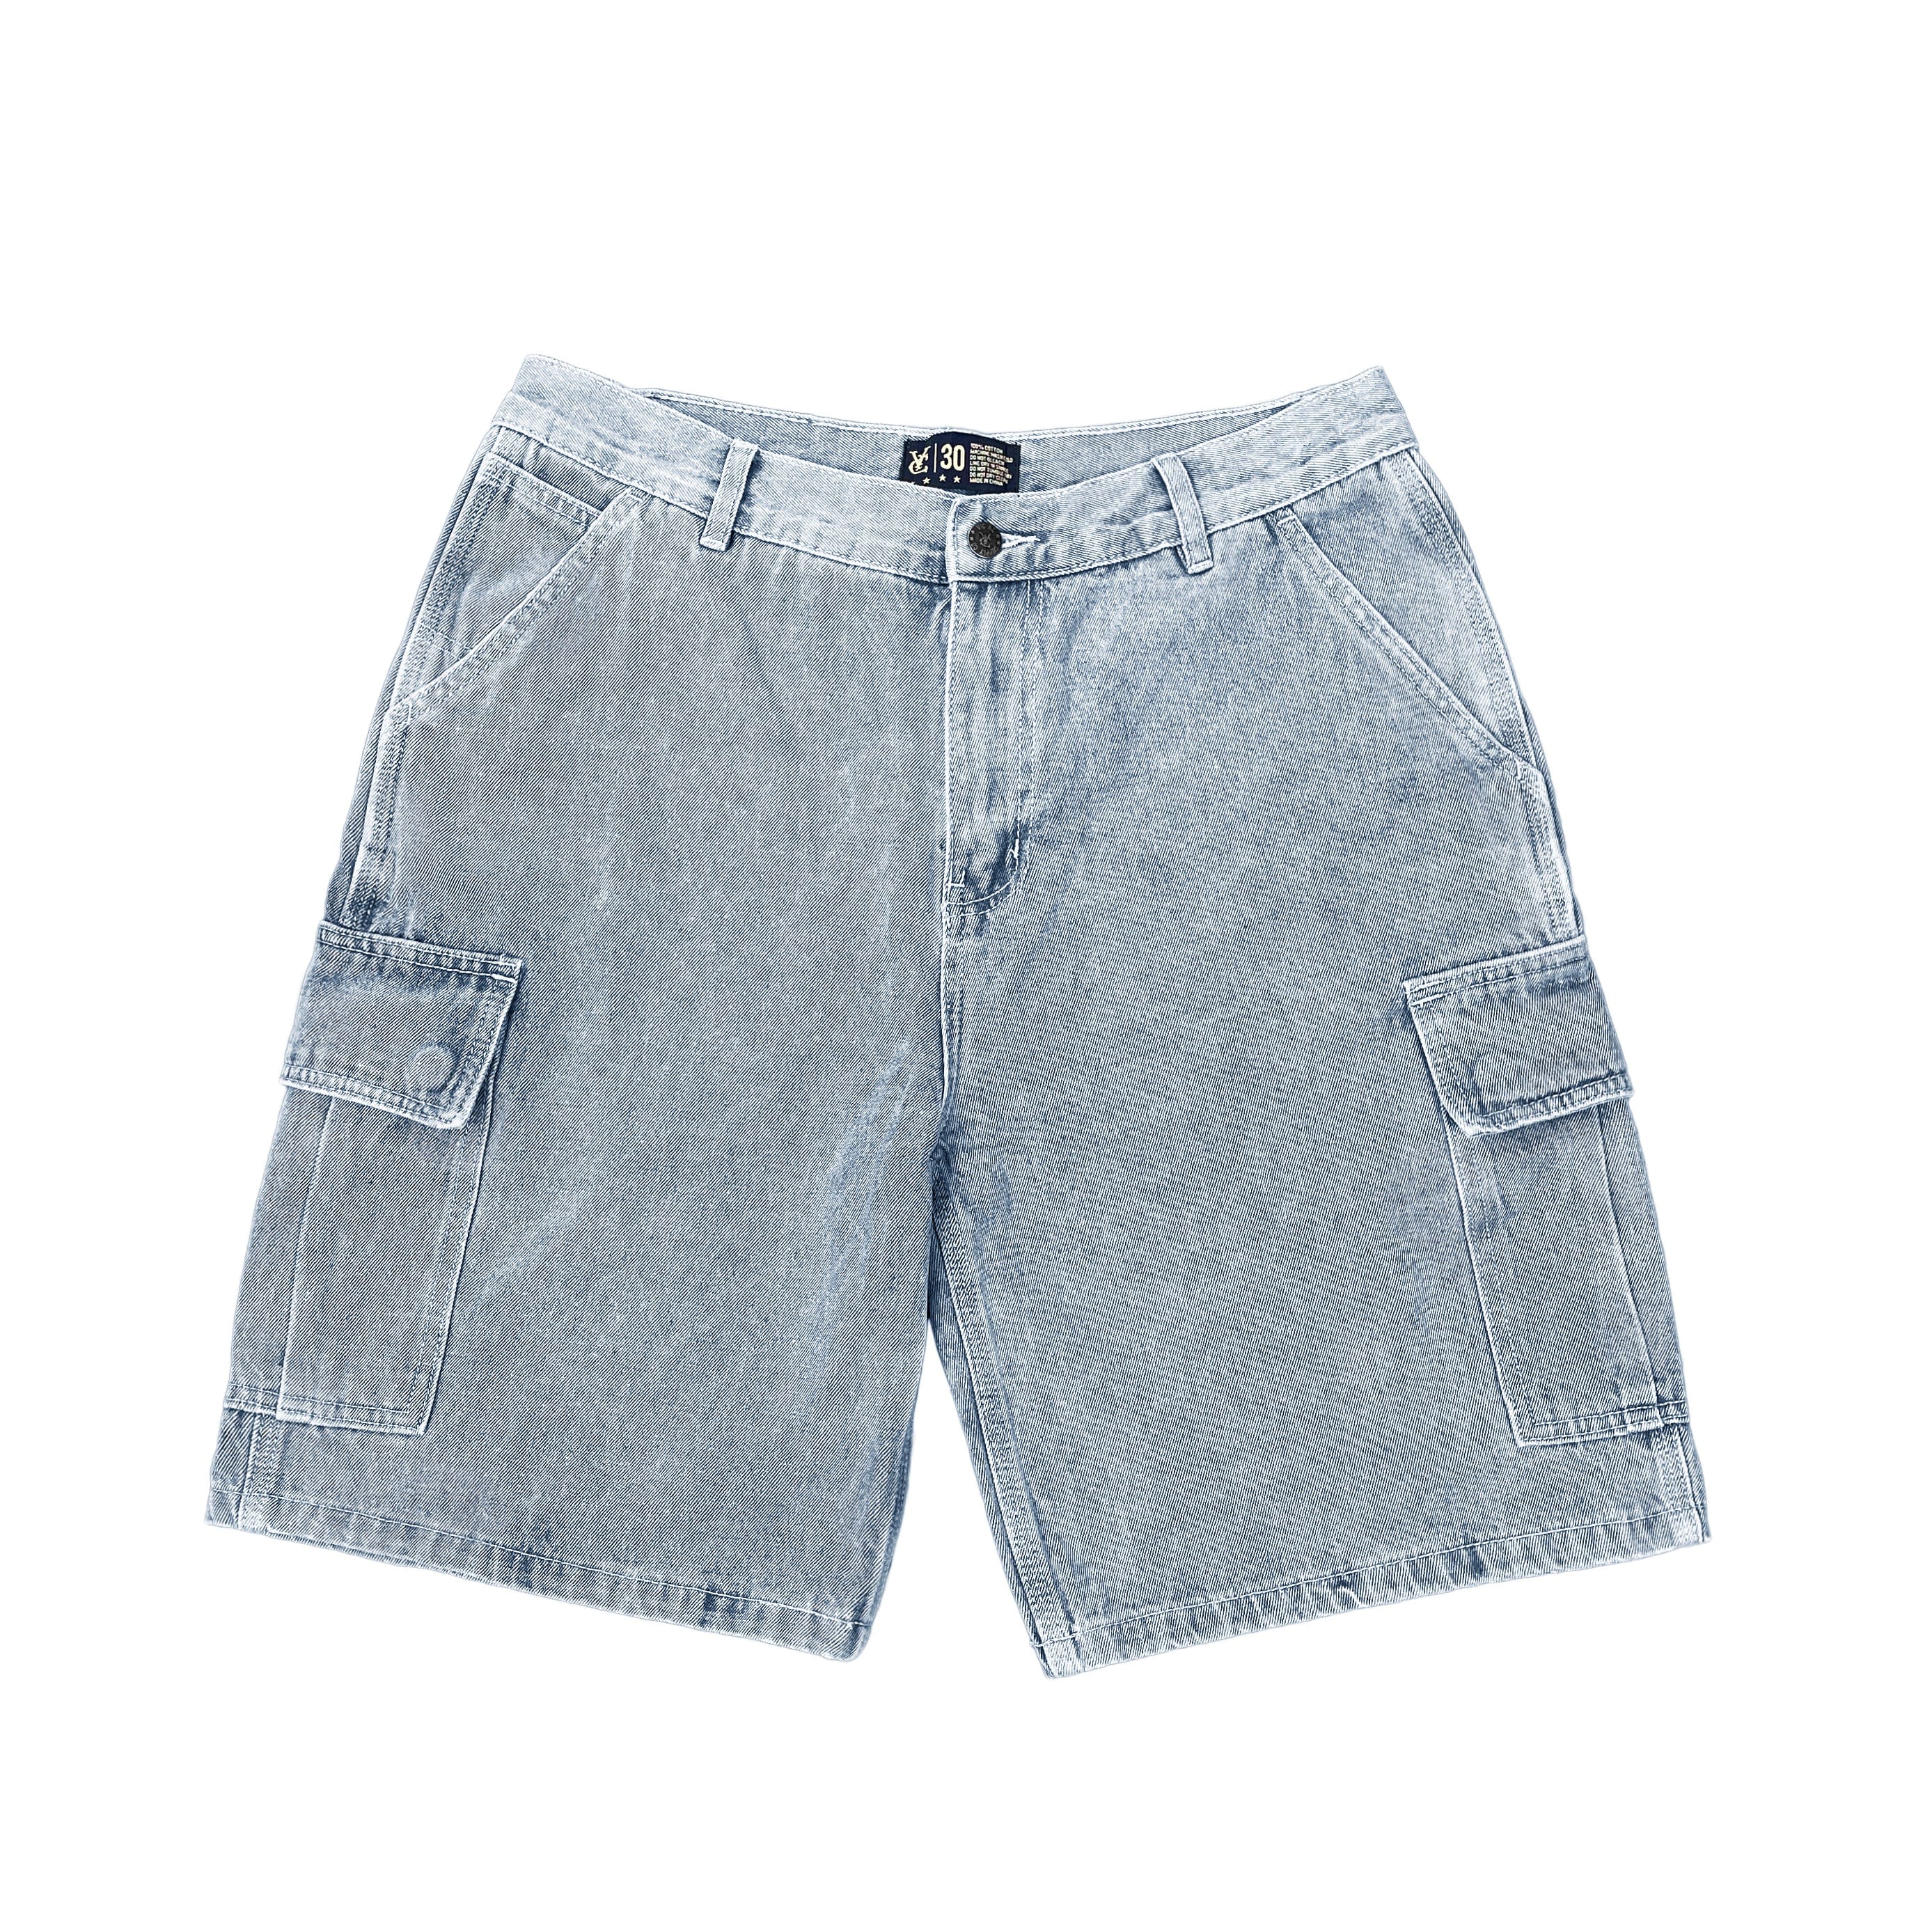 Premium quality cargo denim jean shorts by New Zealand skate and streetwear clothing label VIC Apparel. Loose fit. Featuring utility pockets and triple needle contrast stitching with VIC label flag at the back right pocket. Classic vintage workwear style. 90s baggy jorts style